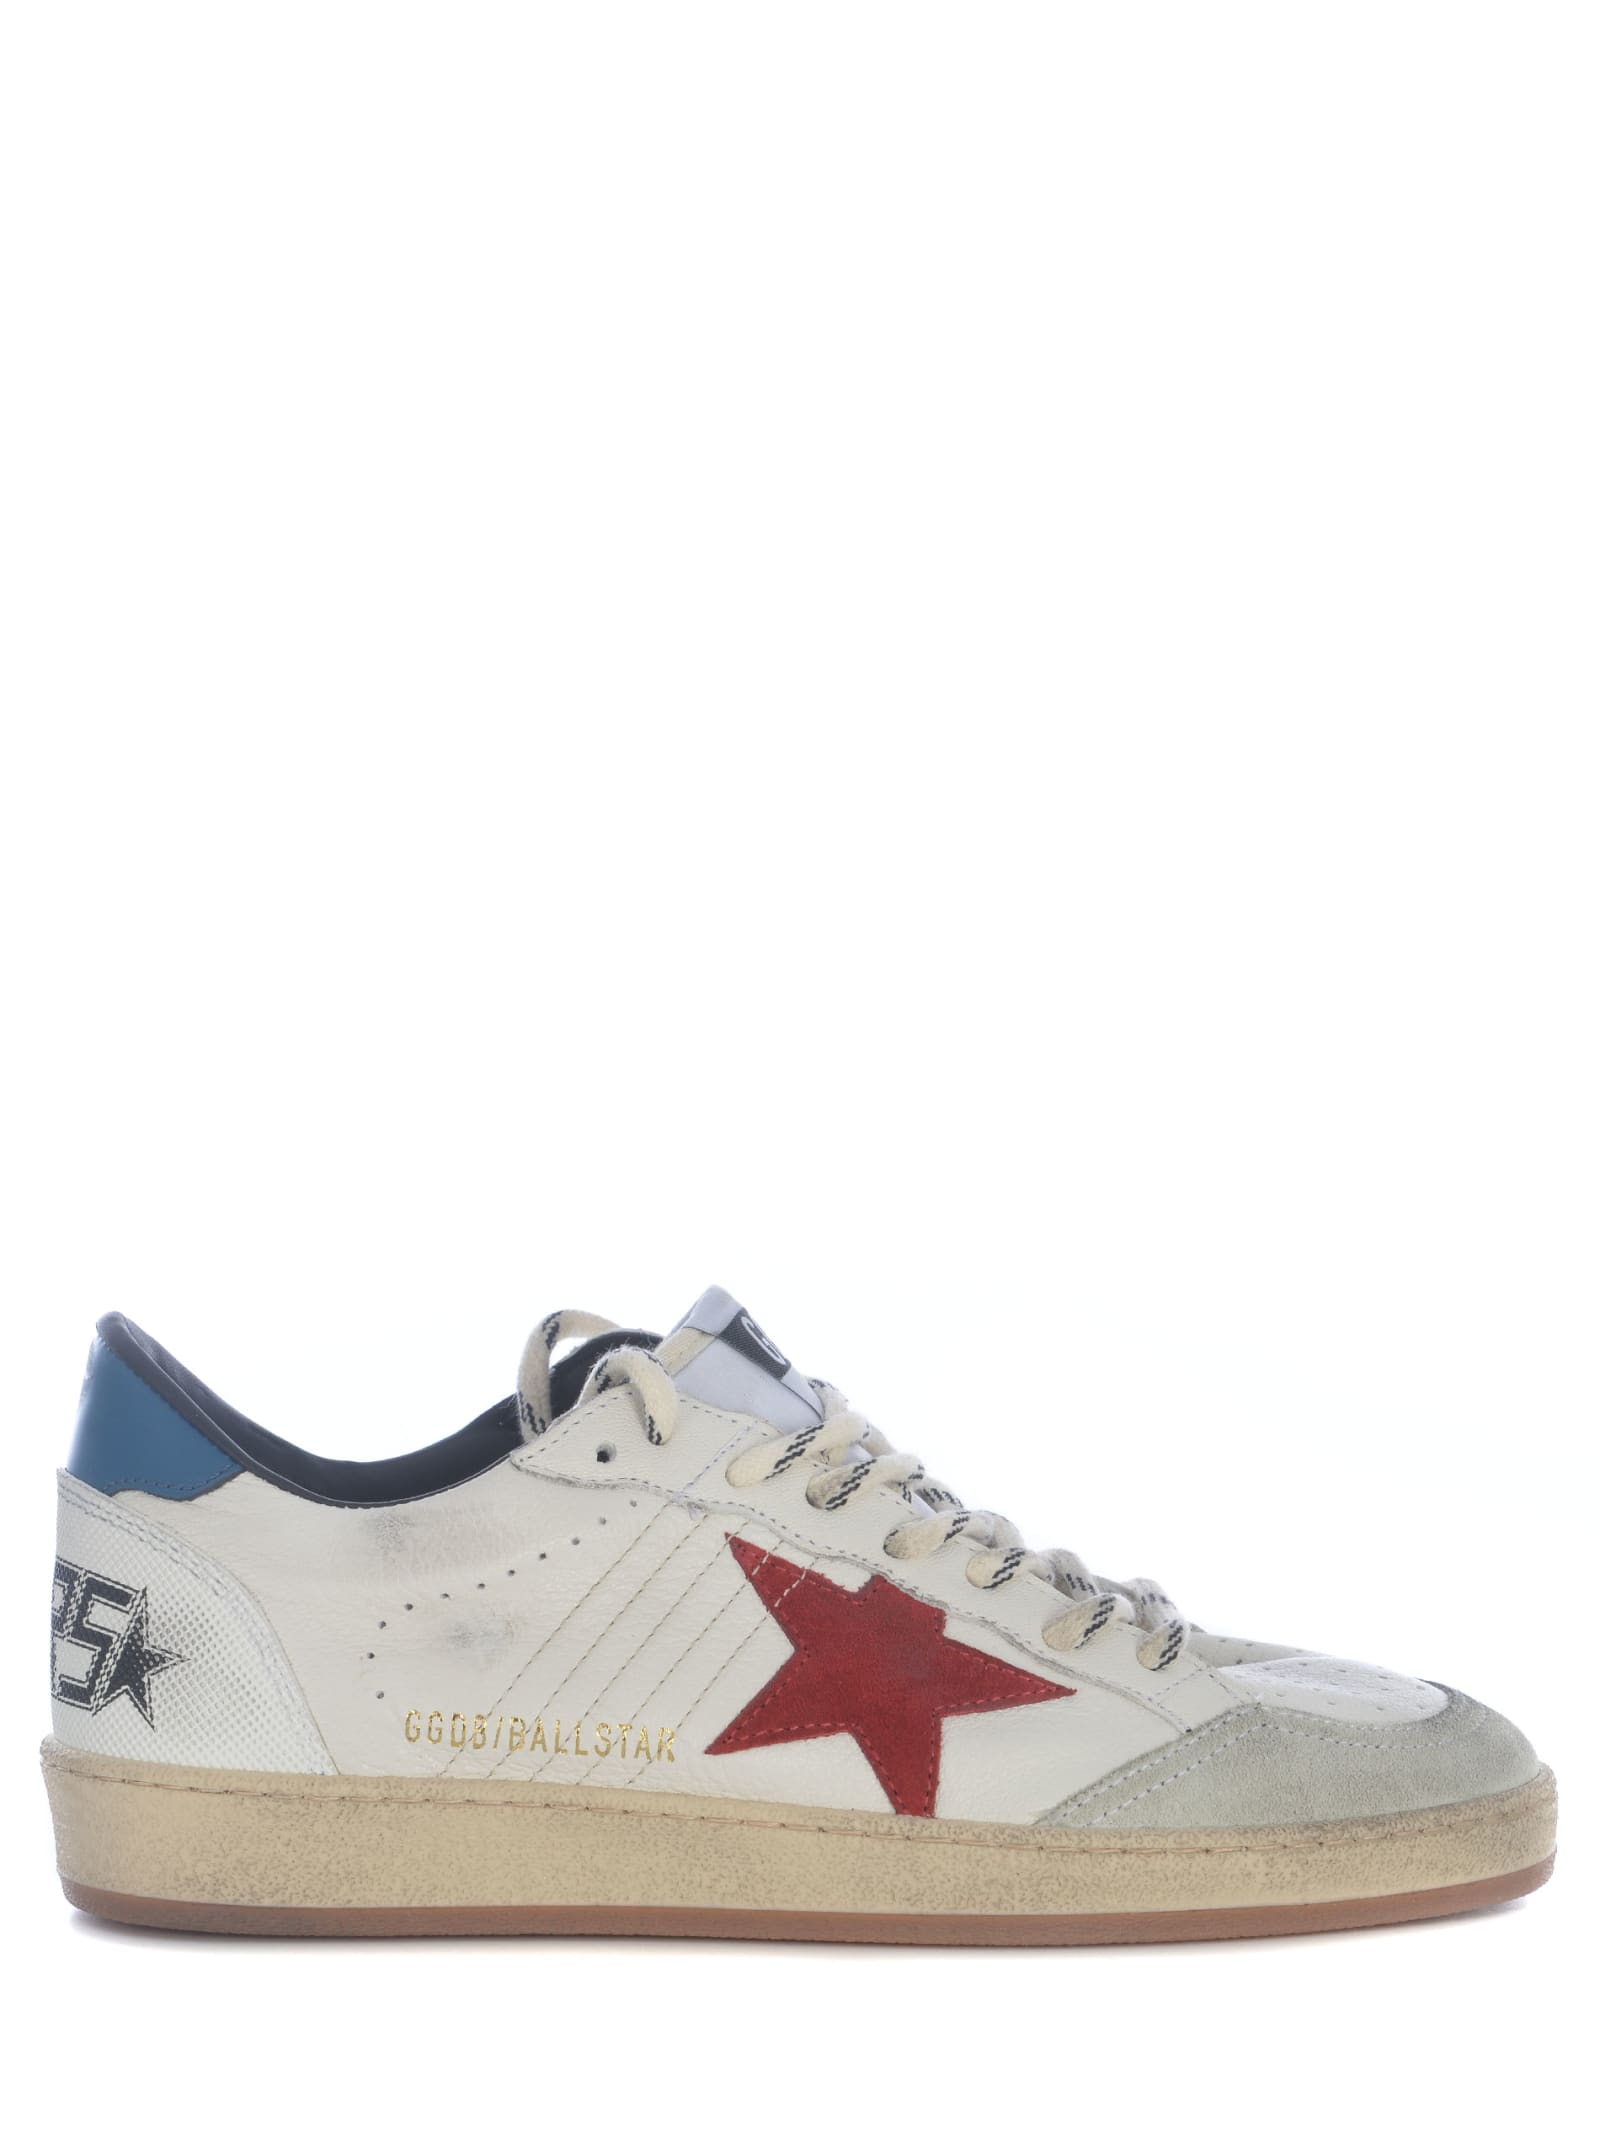 Golden Goose Sneakers  Ball Star Made Of Leather In Red